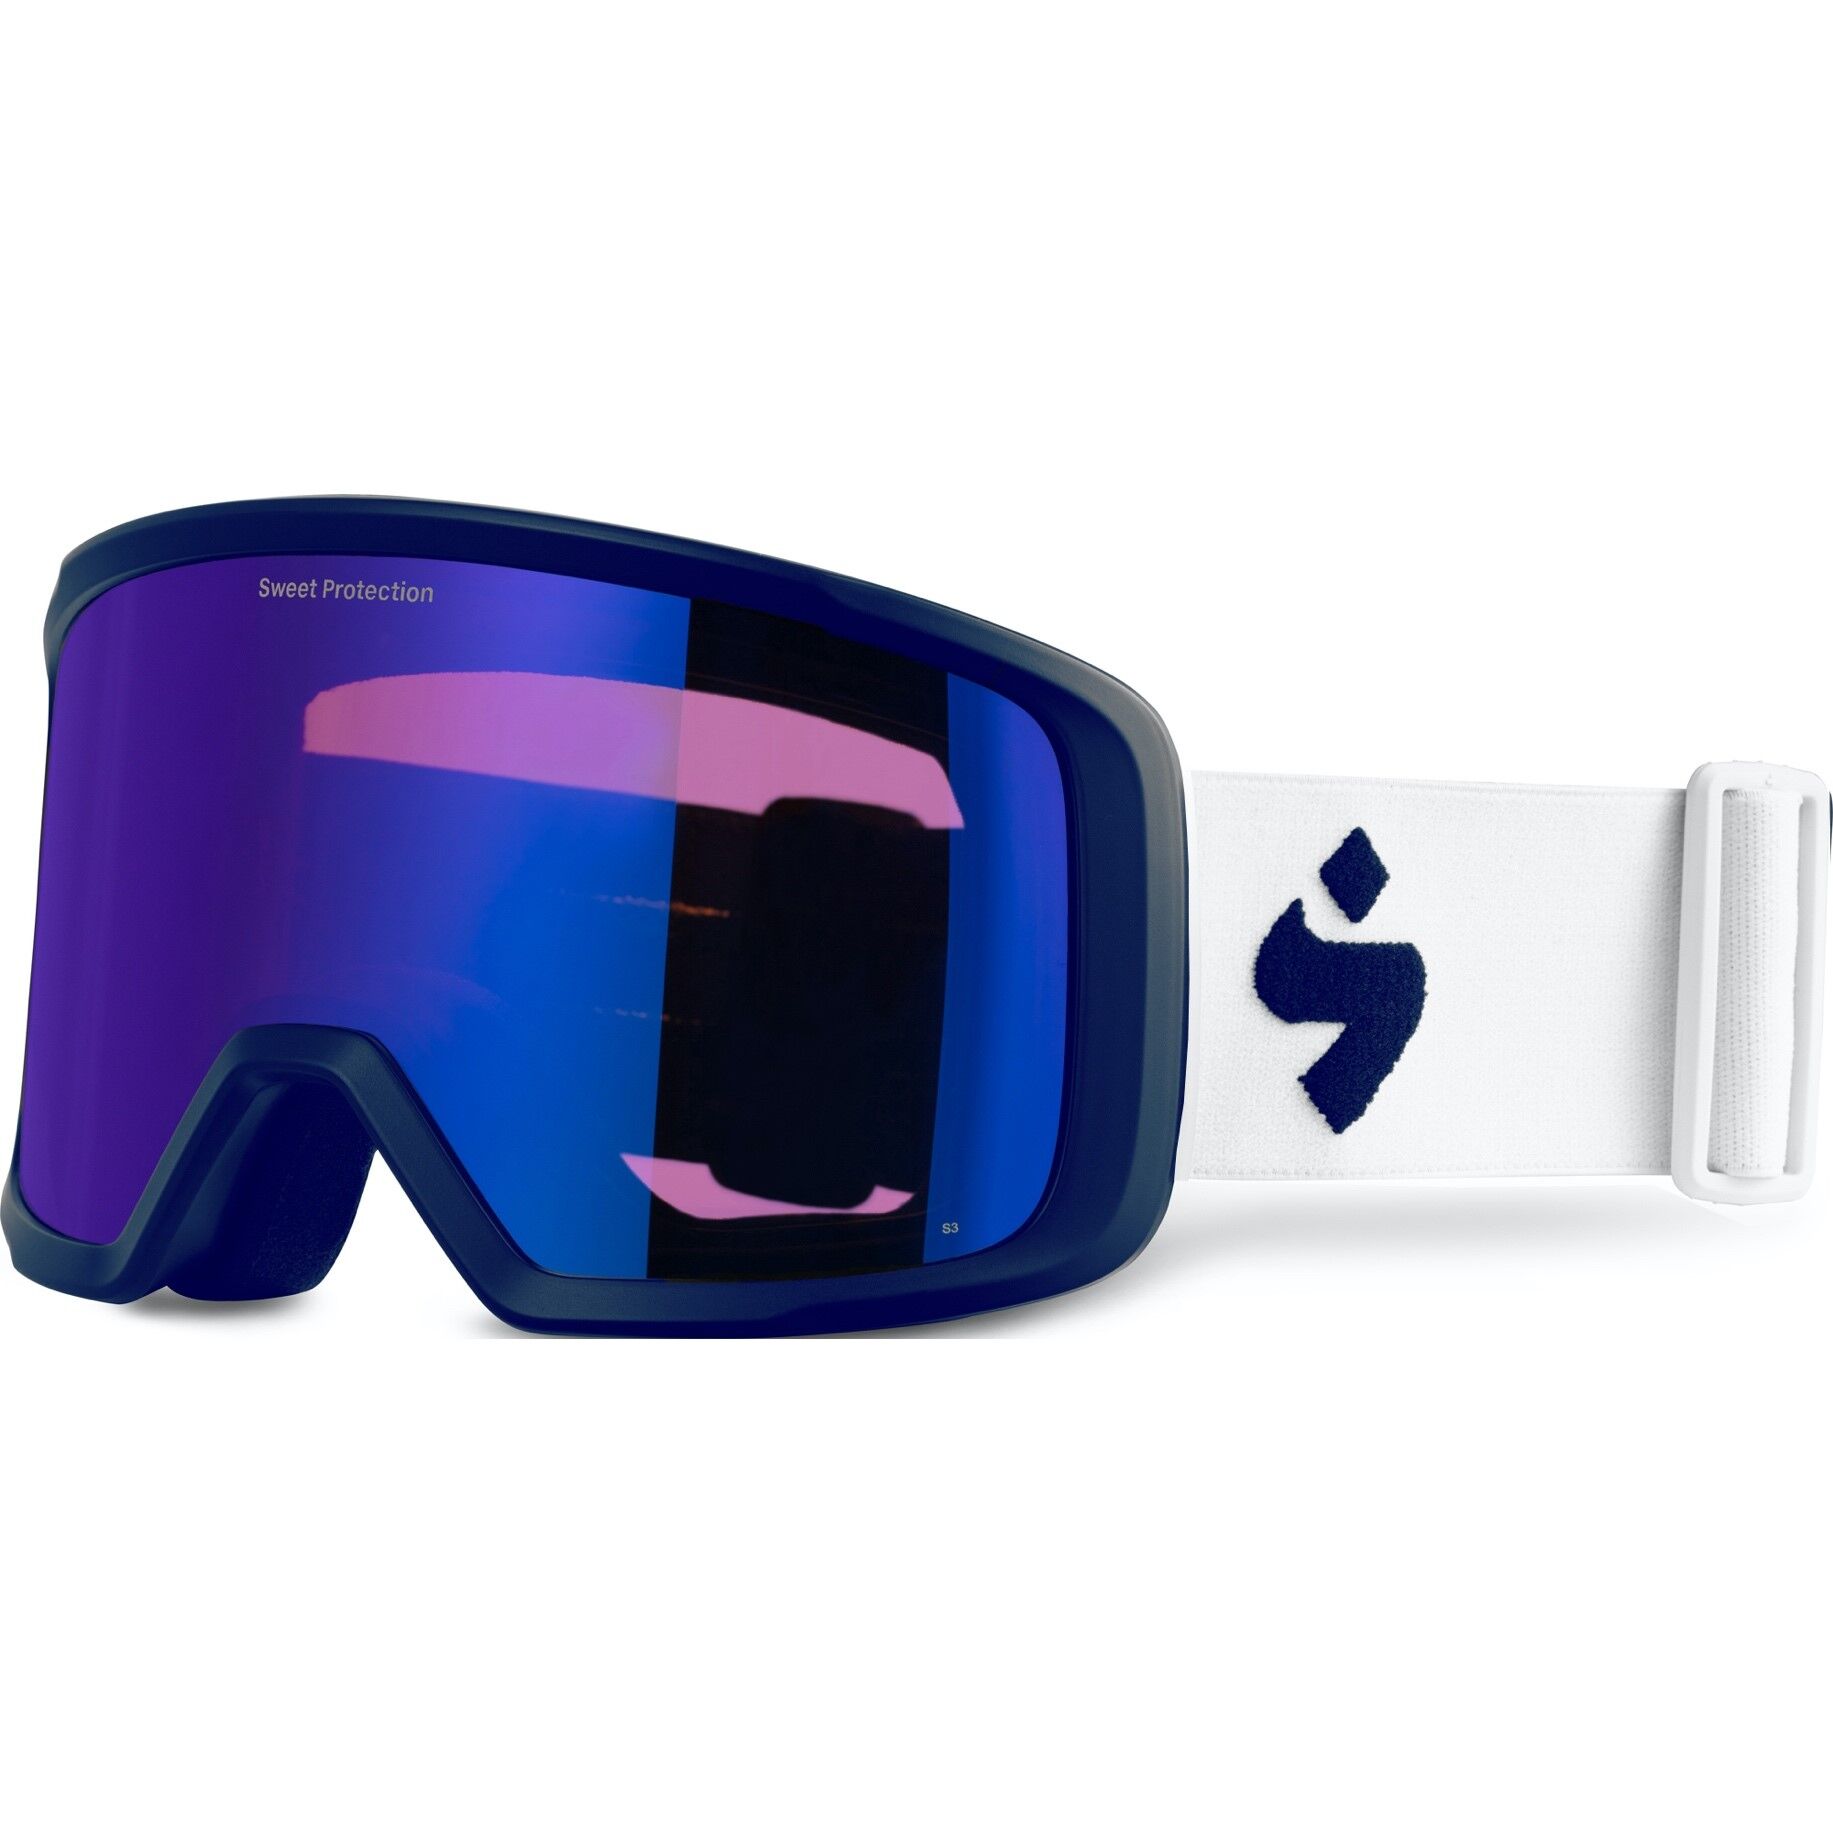 Sweet Protection Firewall MTB RIG Racing Blue/Satin White / RIG Sapphire goggle 850069-SAPRH-RBSW 2020